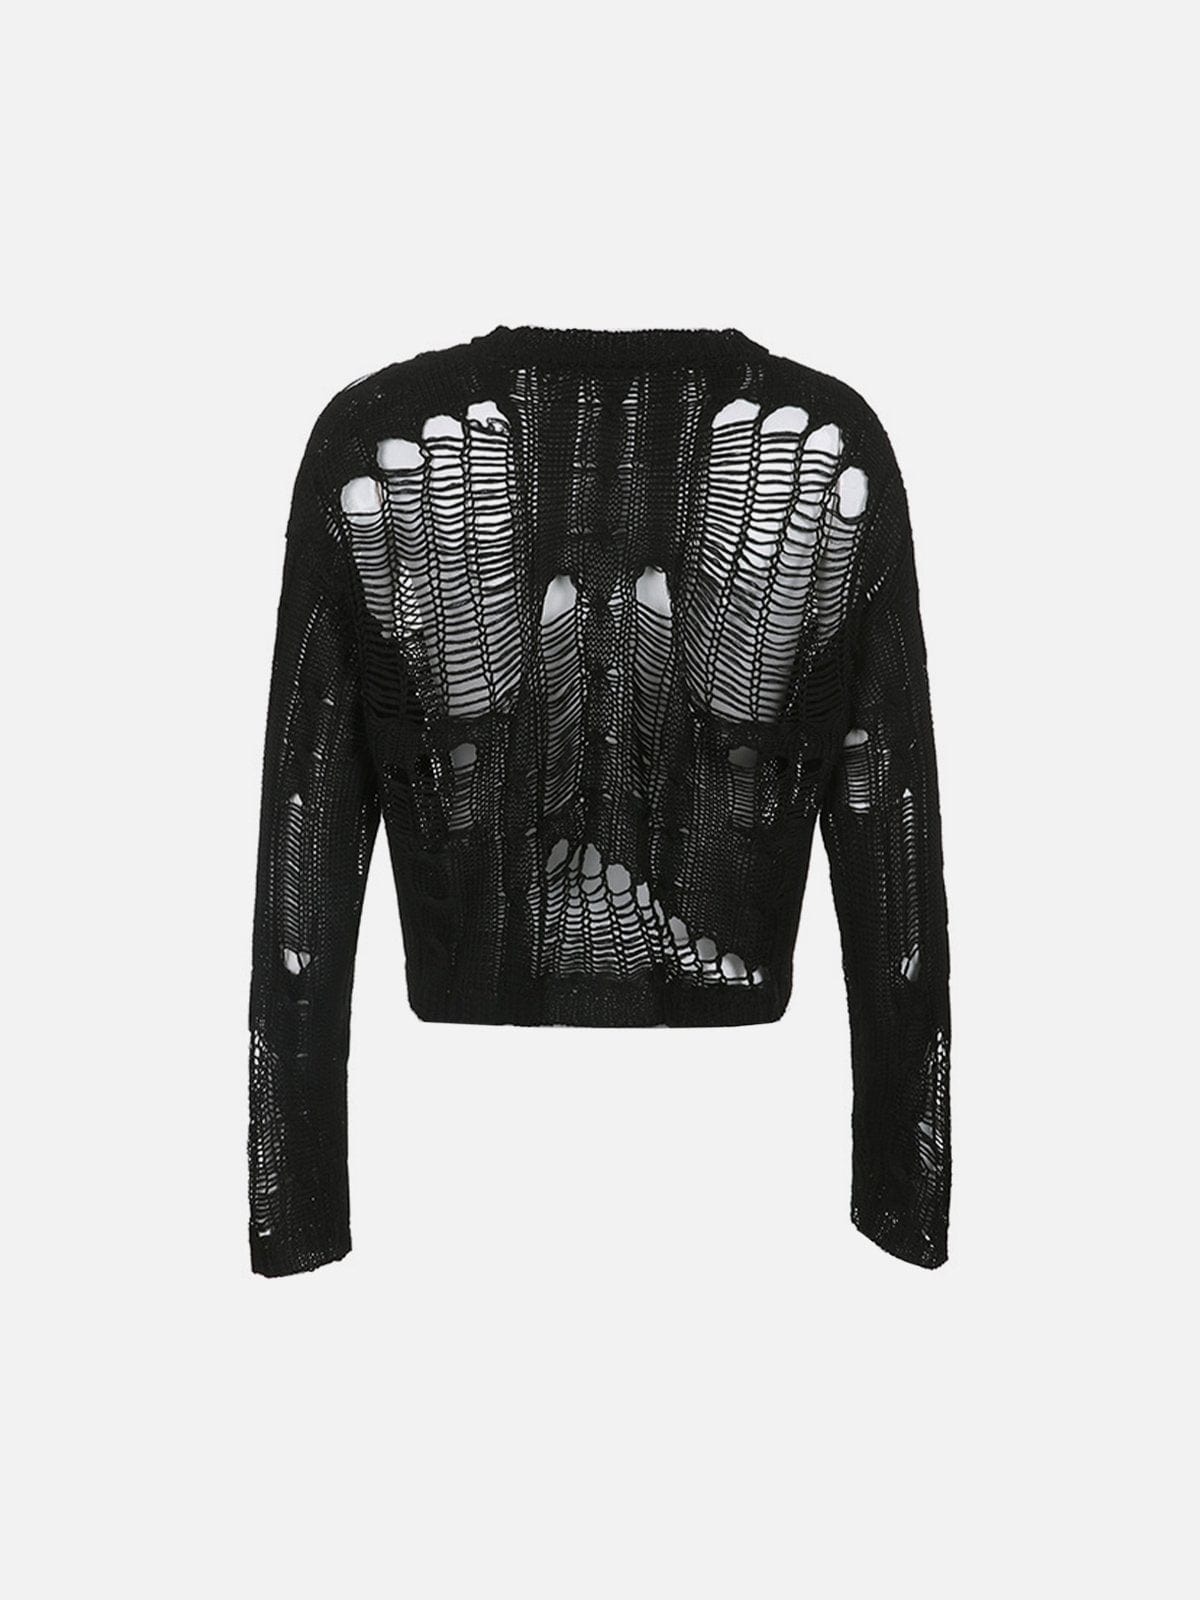 TO Hollow Mesh Sweater